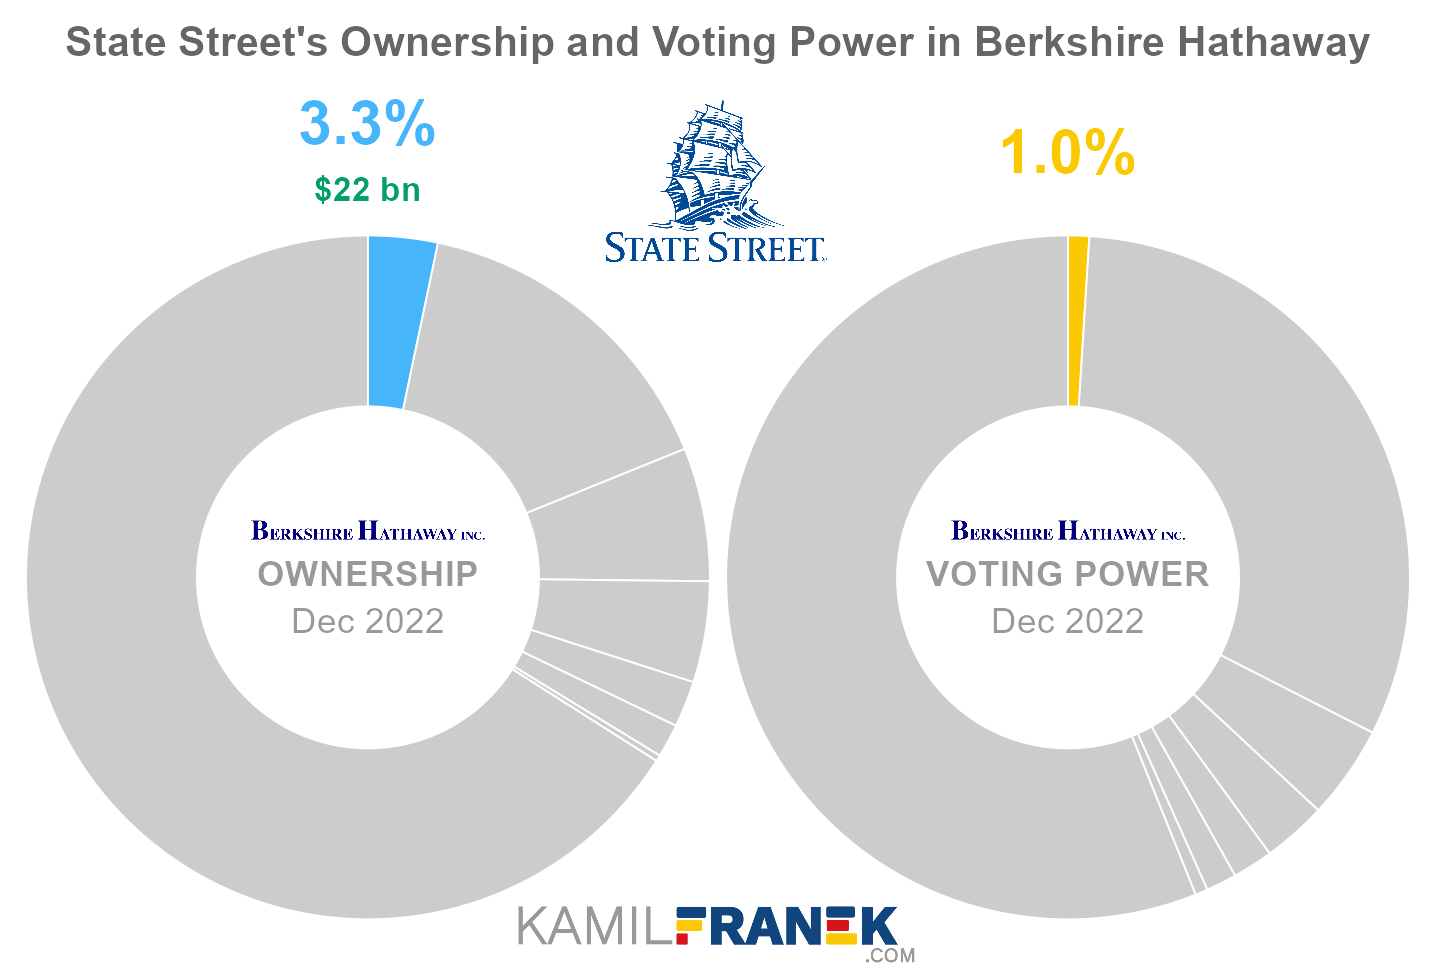 State Street's share ownership and voting power in Berkshire Hathaway (chart)